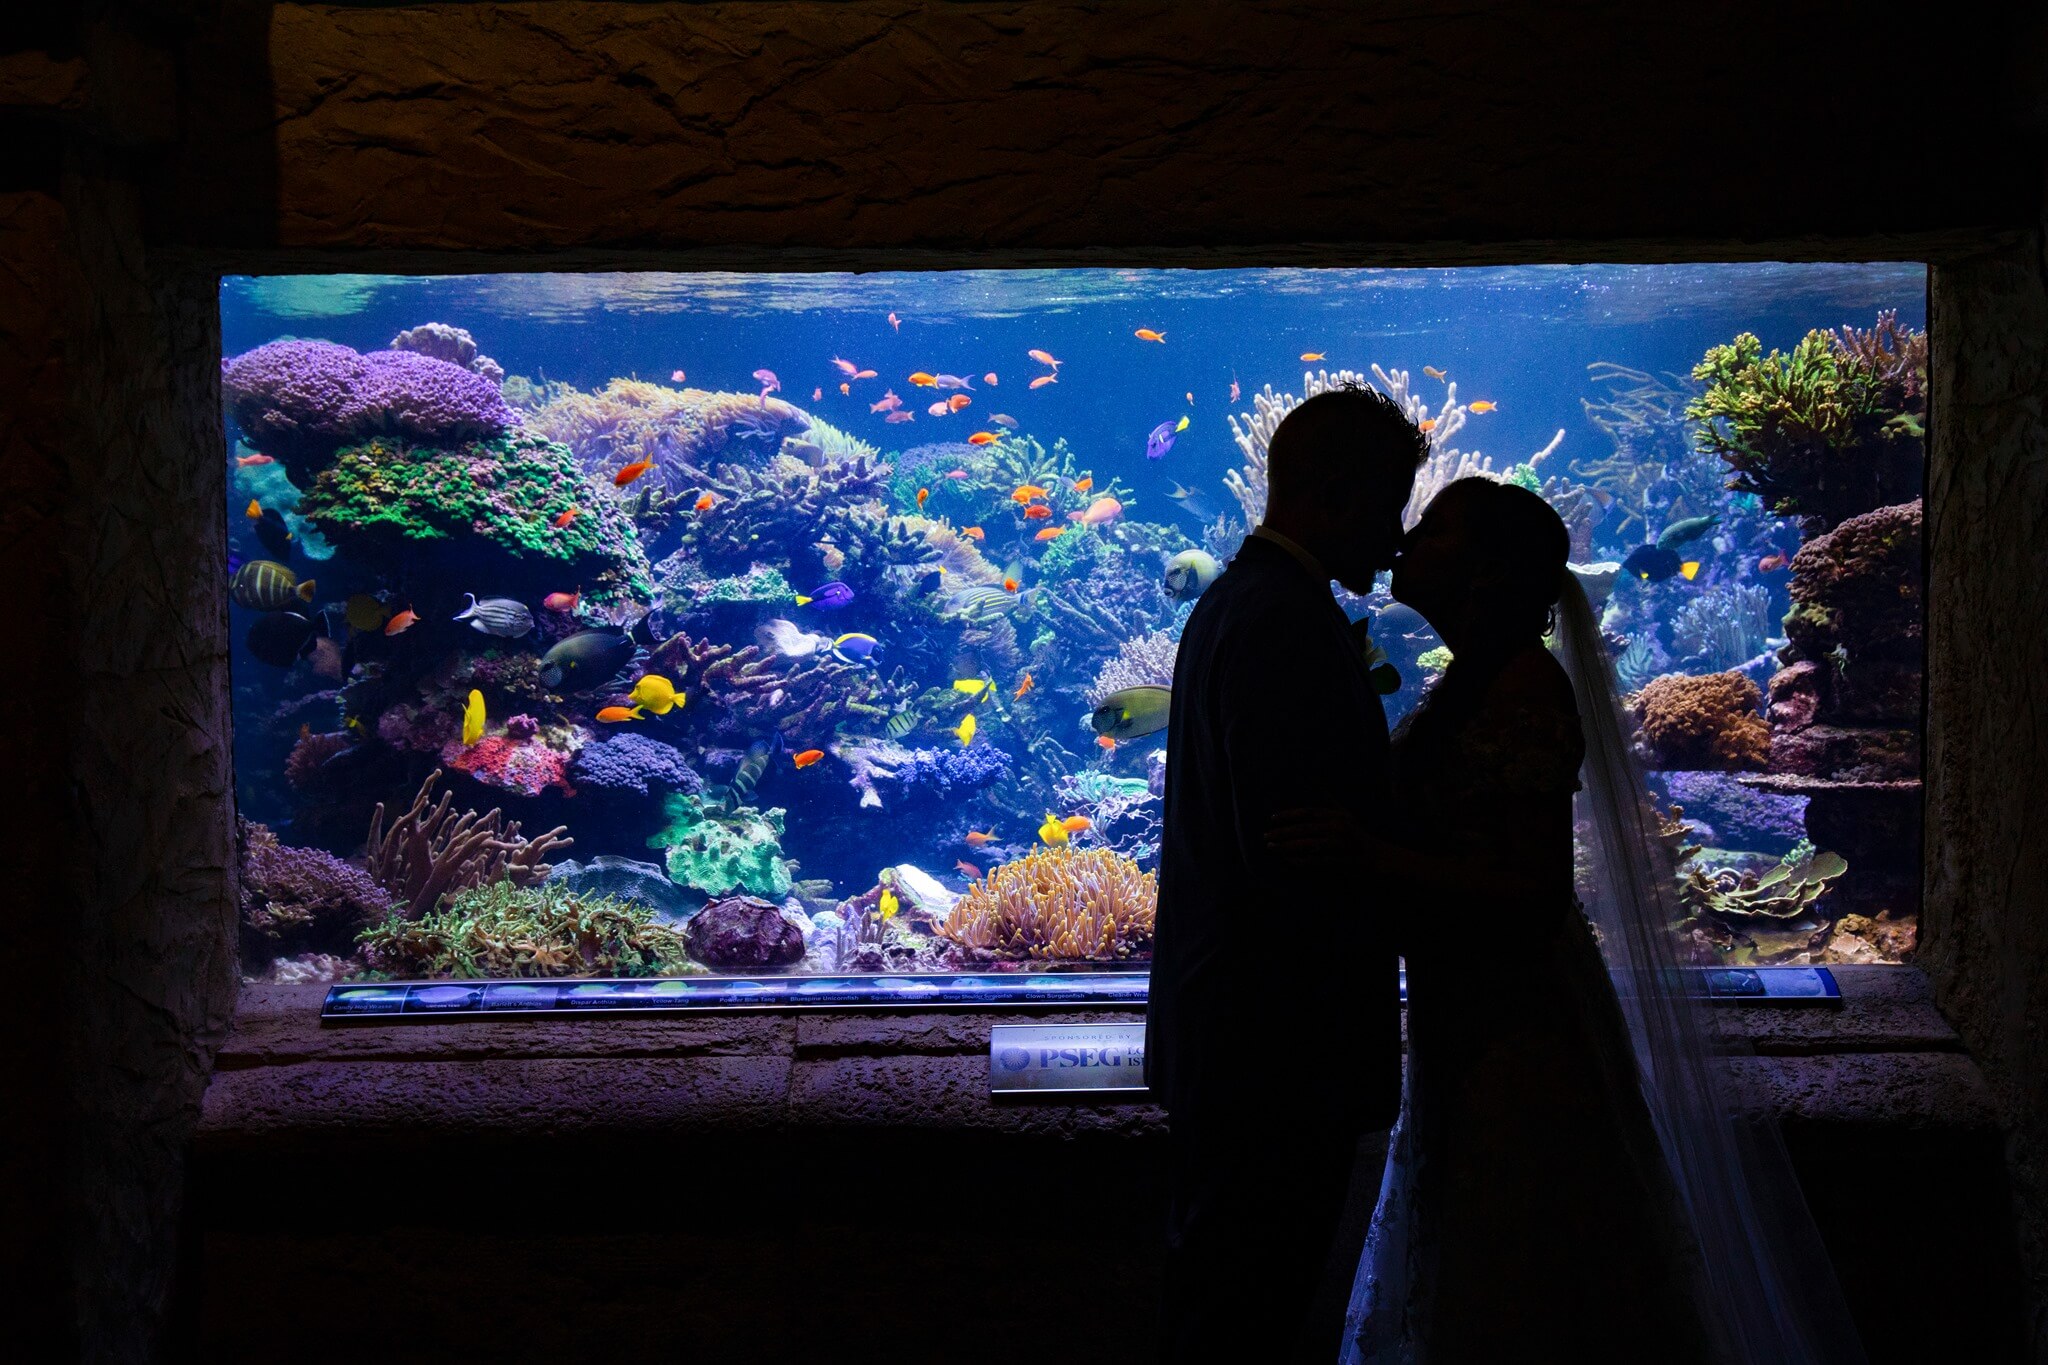 “A Resort Destination on Long Island.” Atlantis Banquets & Events Has Everything You Need For the Perfect Long Island Wedding…Including Penguins